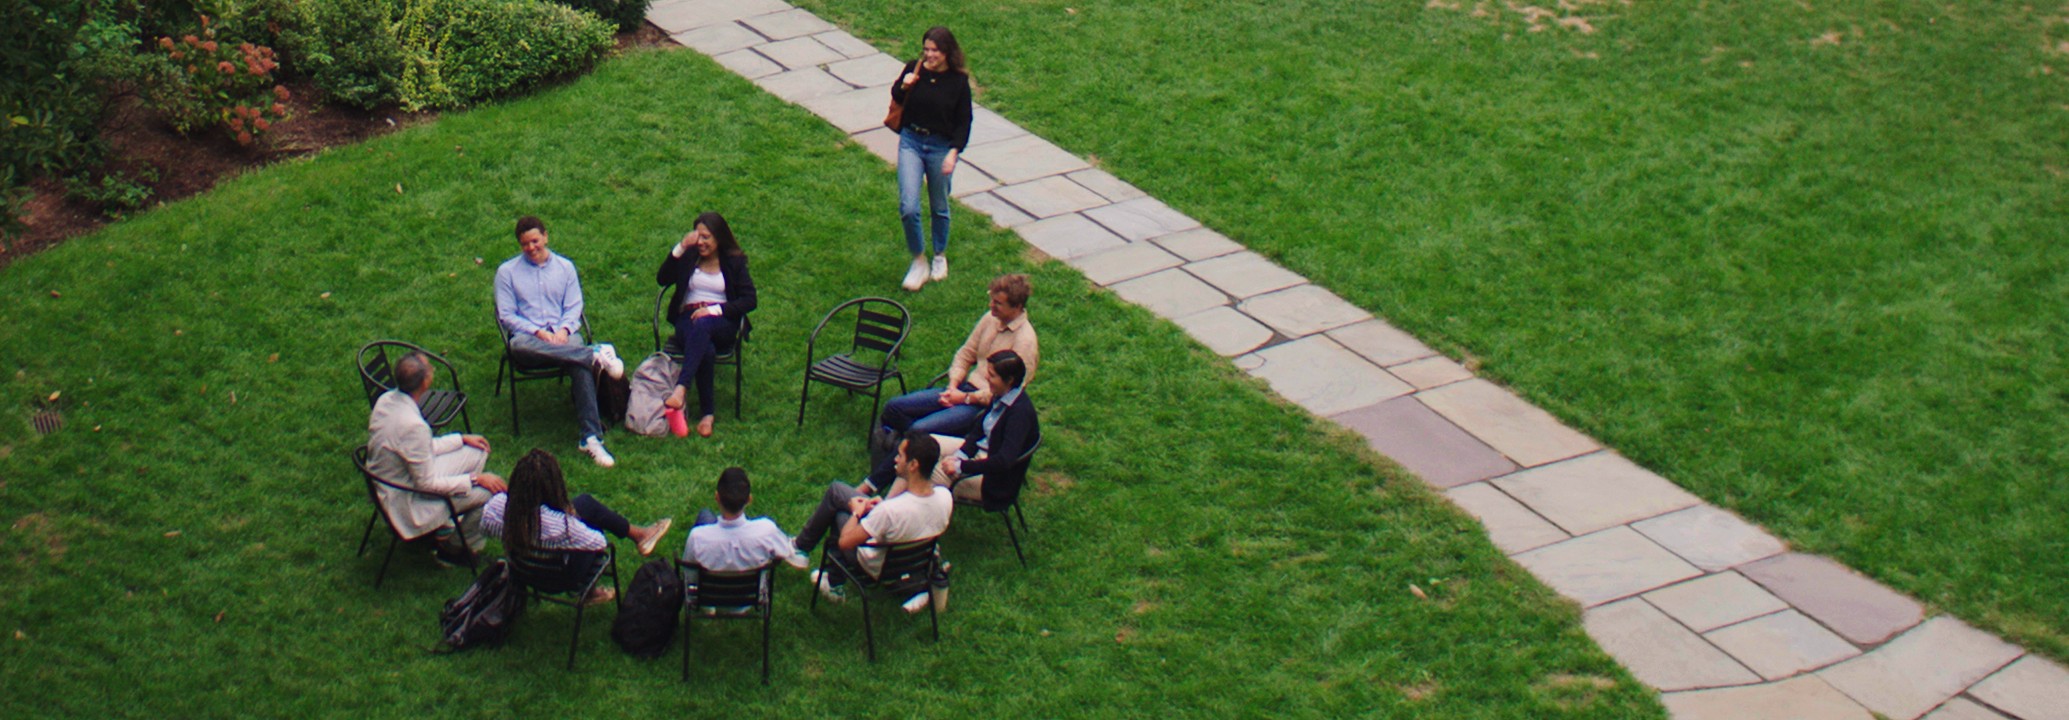 Students And Professor In Courtyard